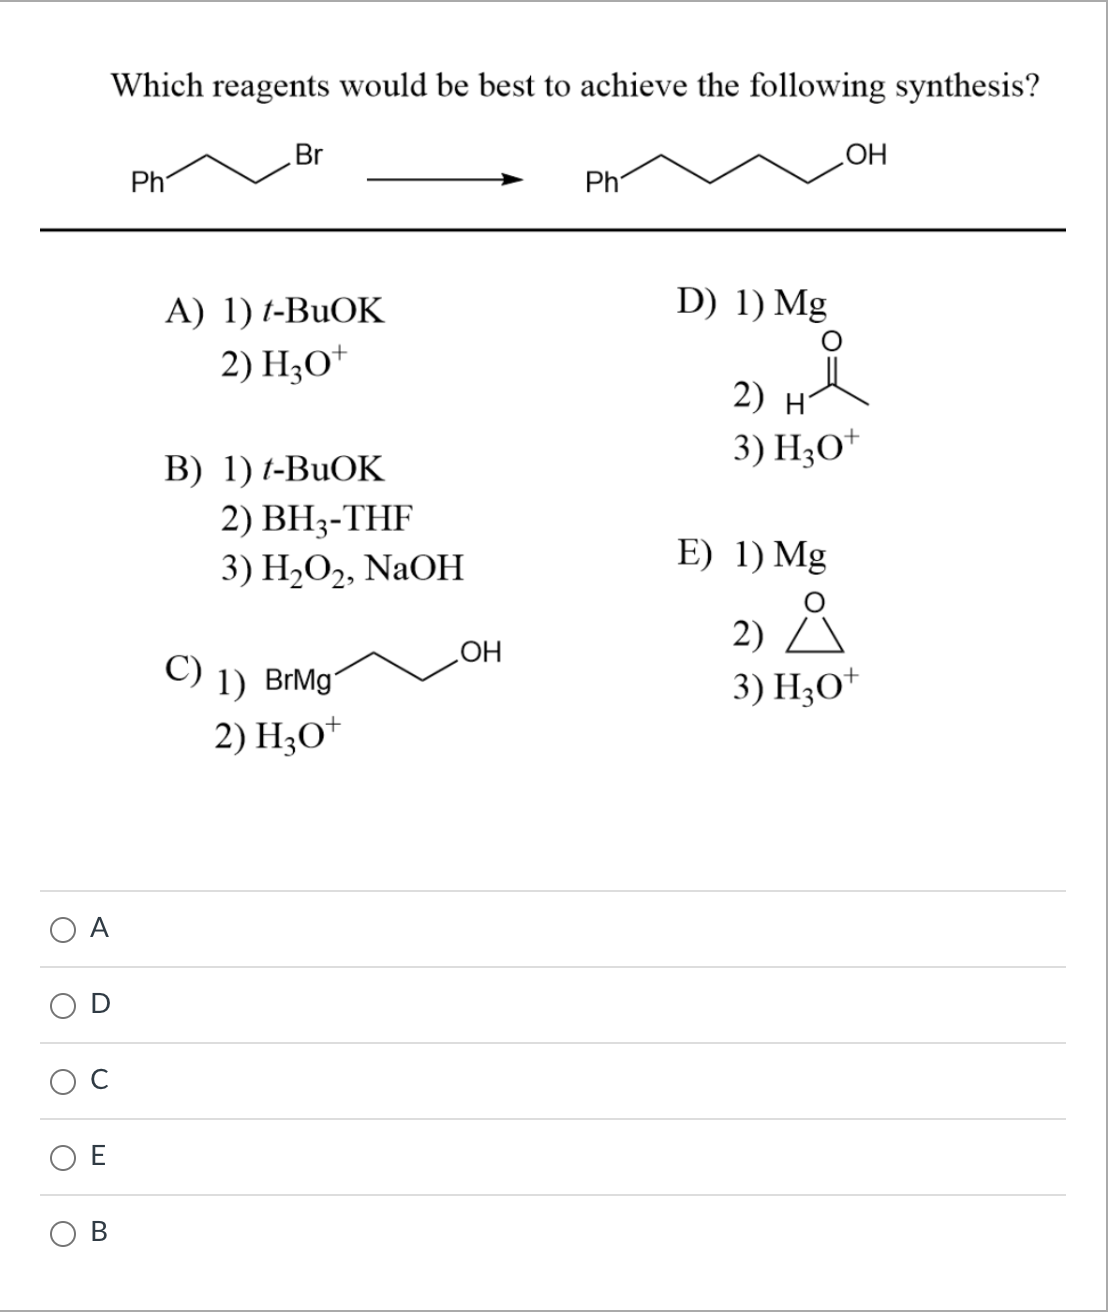 O
O
U
Which reagents would be best to achieve the following synthesis?
B
Ph
Br
A) 1) t-BuOK
2) H₂O+
B) 1) t-BuOK
2) BH₂-THF
3) H₂O2, NaOH
C) 1) BrMg
2) H3O+
OH
Ph
OH
D) 1) Mg
2) H
3) H3O+
E) 1) Mg
2) Å
3) H3O+